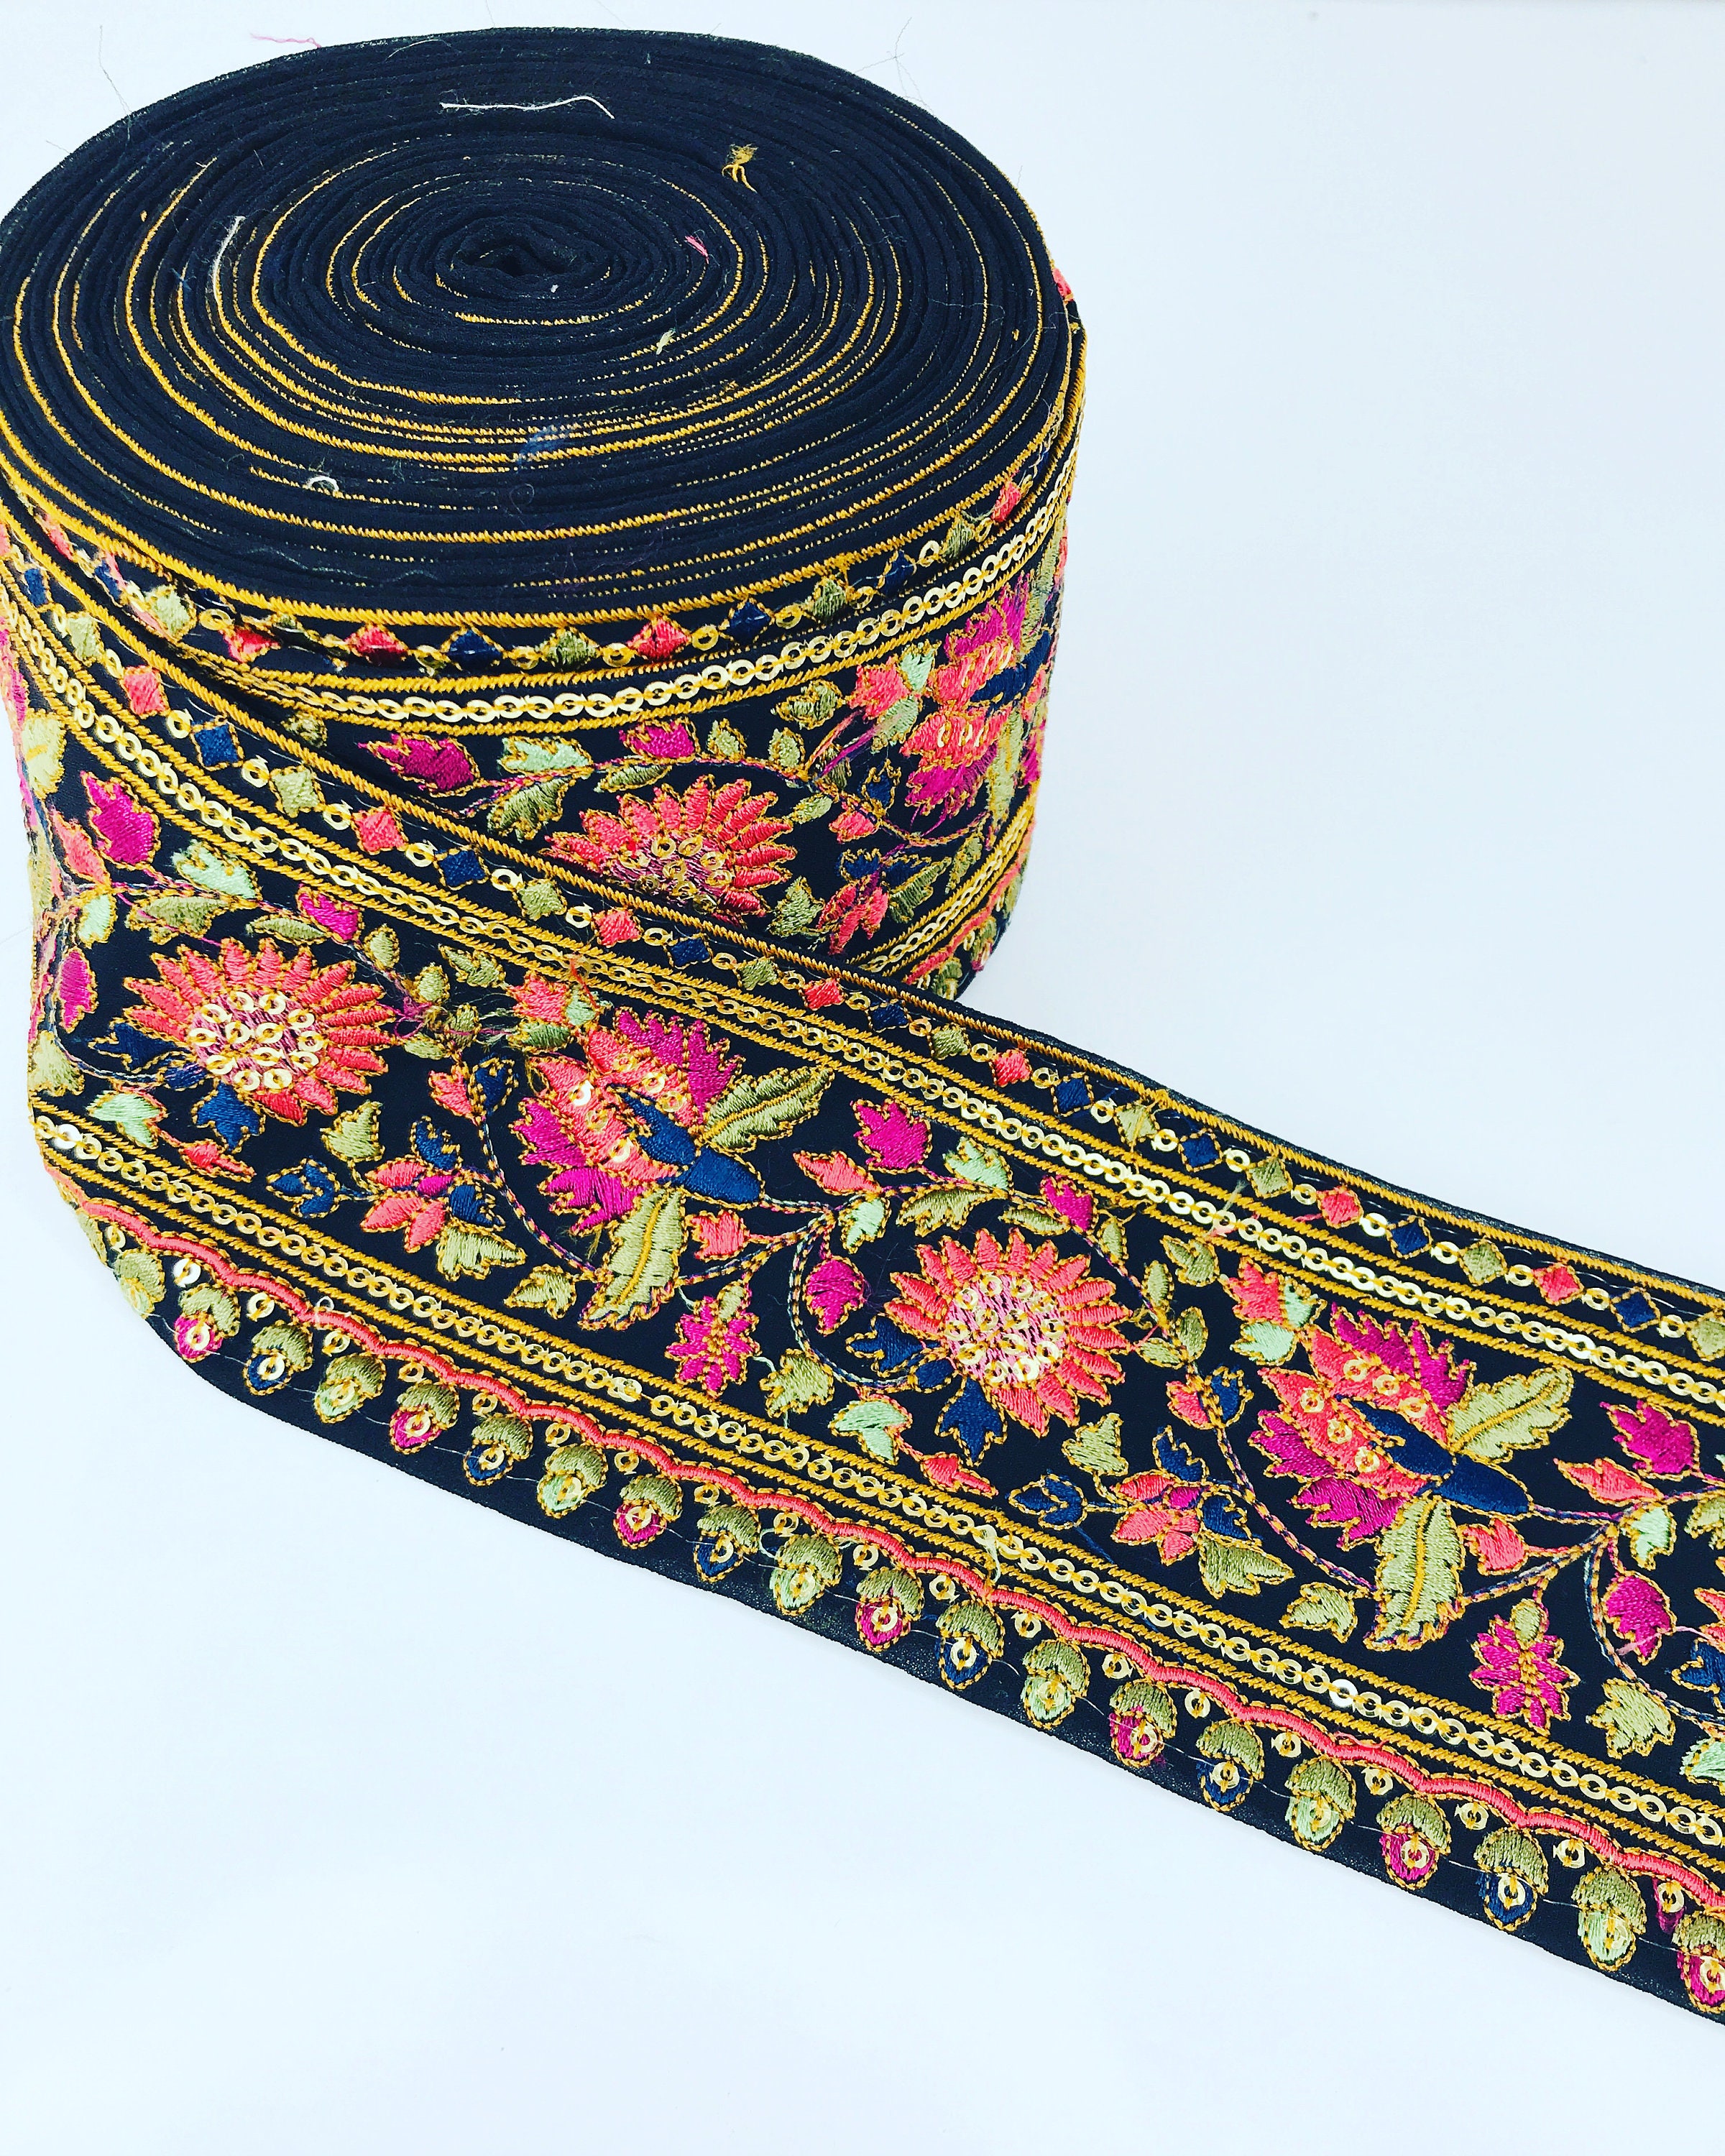 Floral Embroidered Sari Fabric Border Ribbons Laces Trims - Etsy